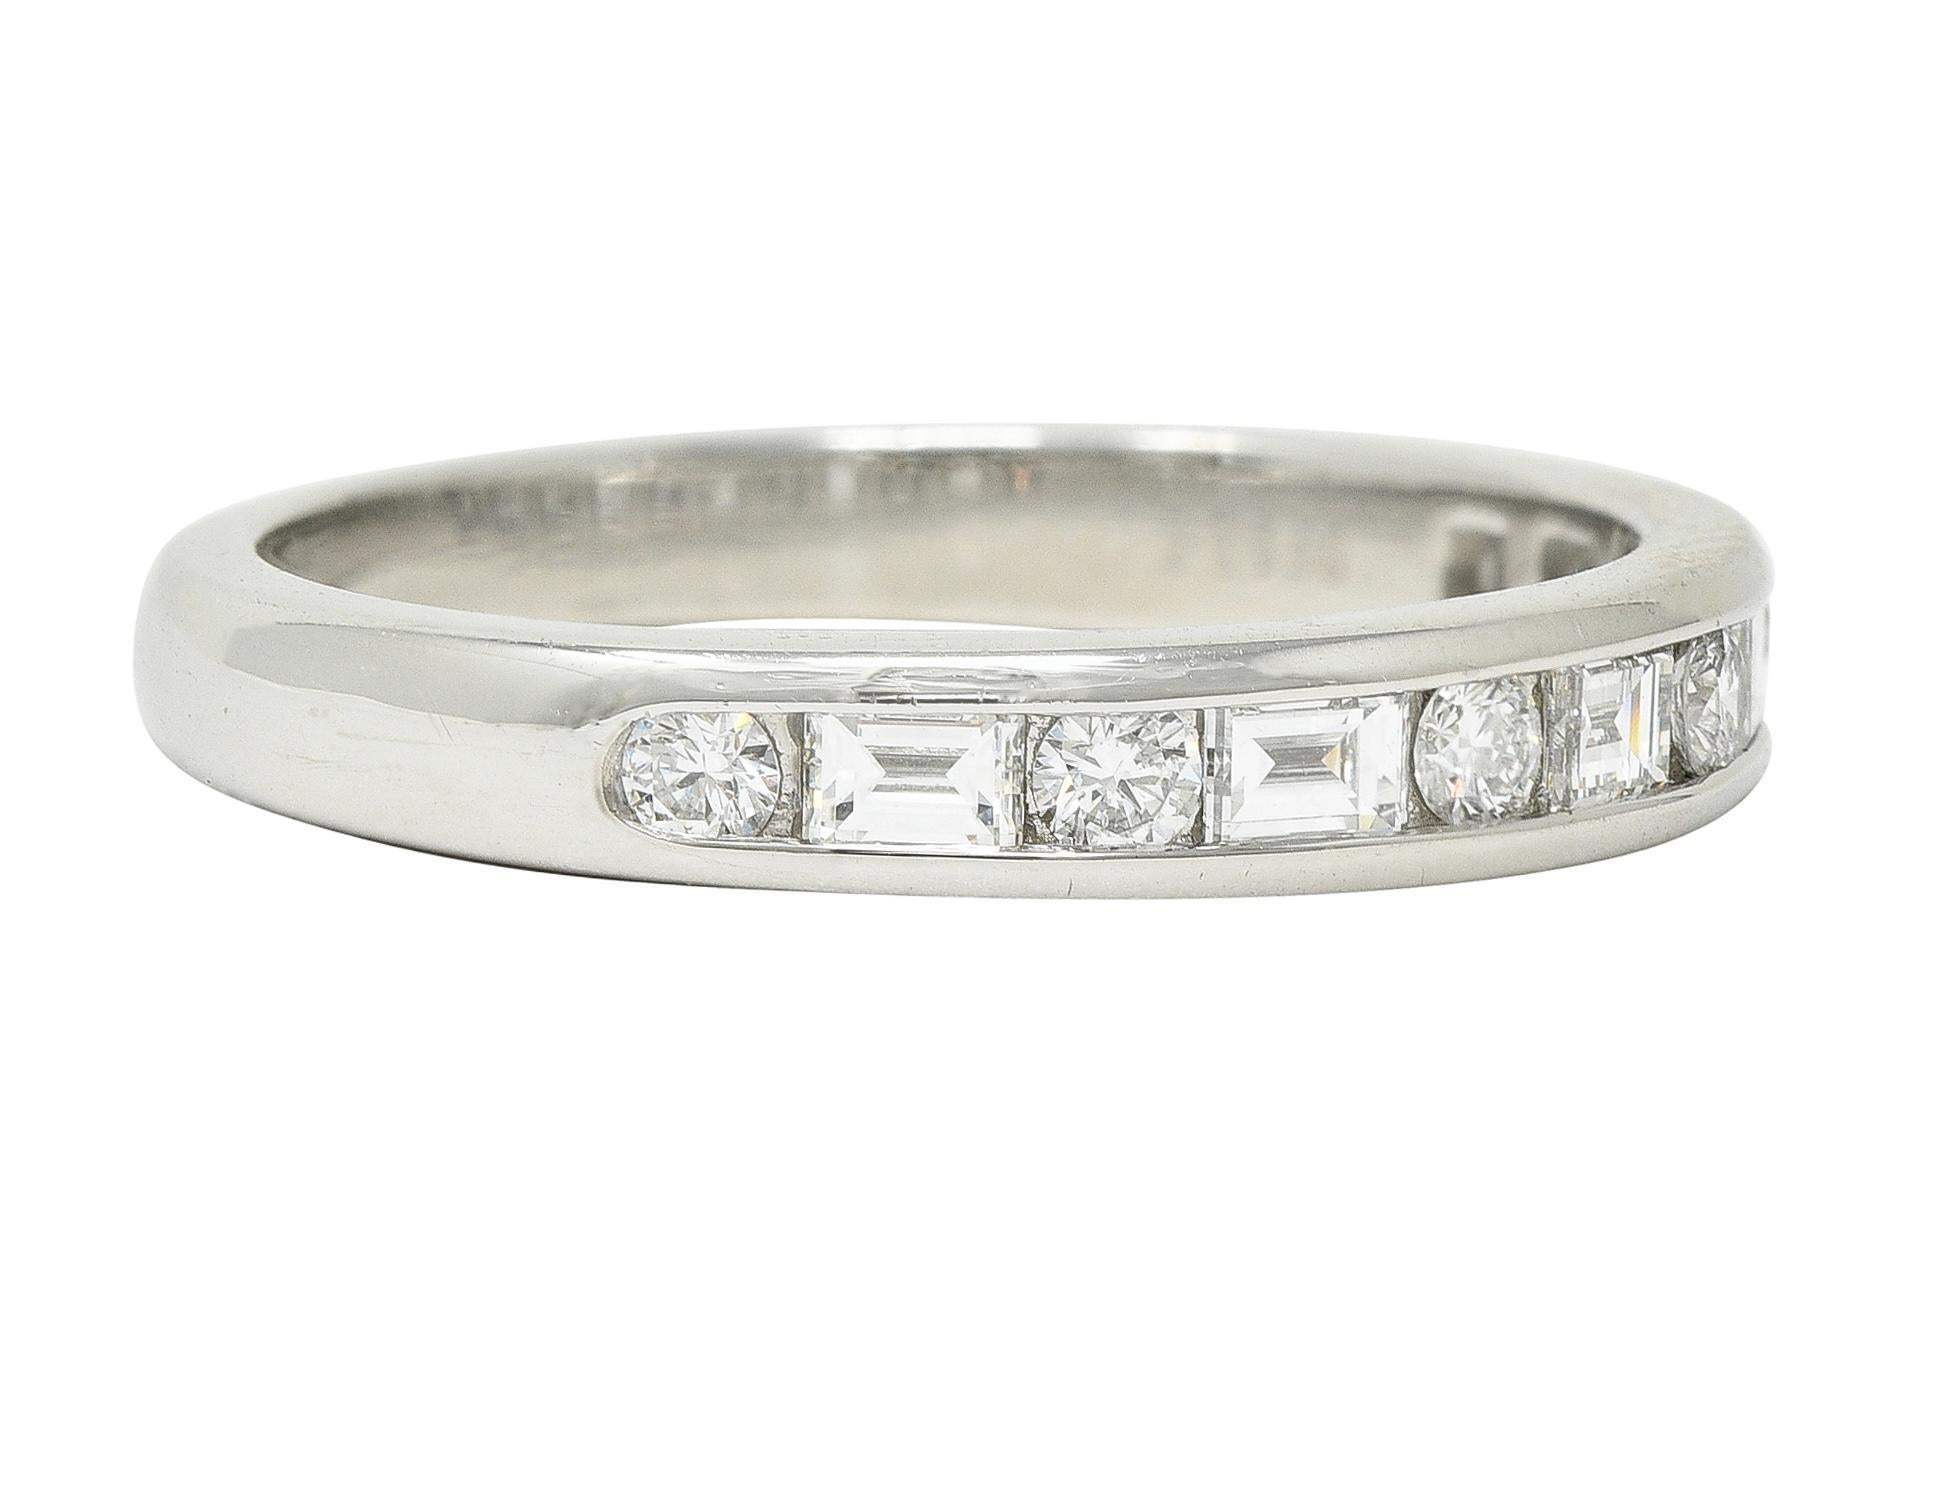 Comprised of round brilliant and baguette cut diamonds alternating in pattern 
Channel set to front and weighing approximately 0.66 carat total 
G color with VS1 clarity
Completed by high polish finish
Stamped for platinum 
Fully signed for Tiffany